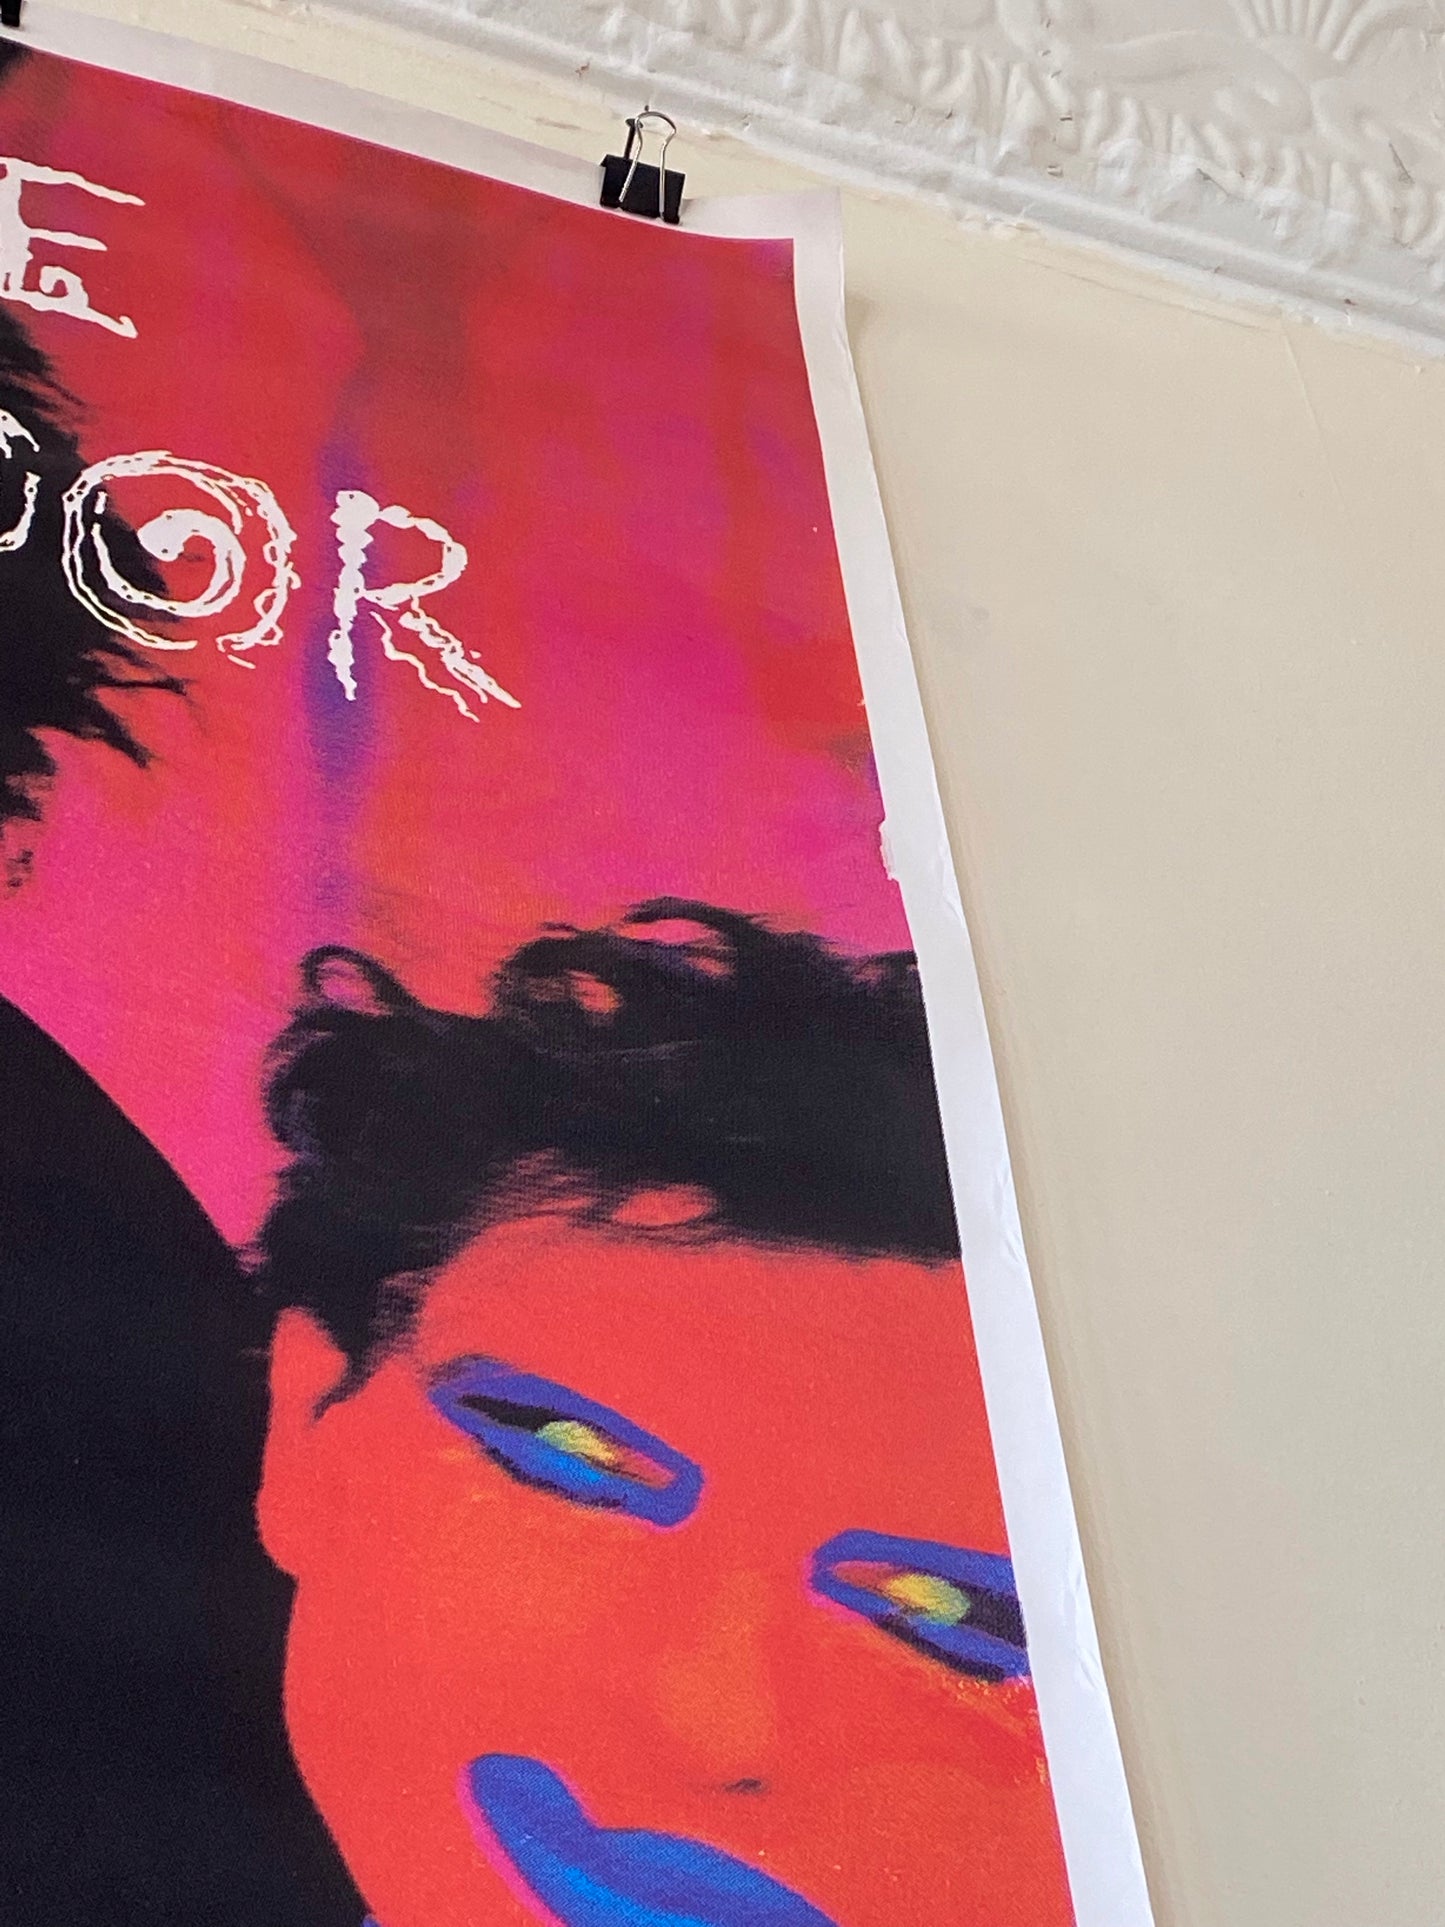 80’s The Cure “The Head on the Door” XL Album Poster